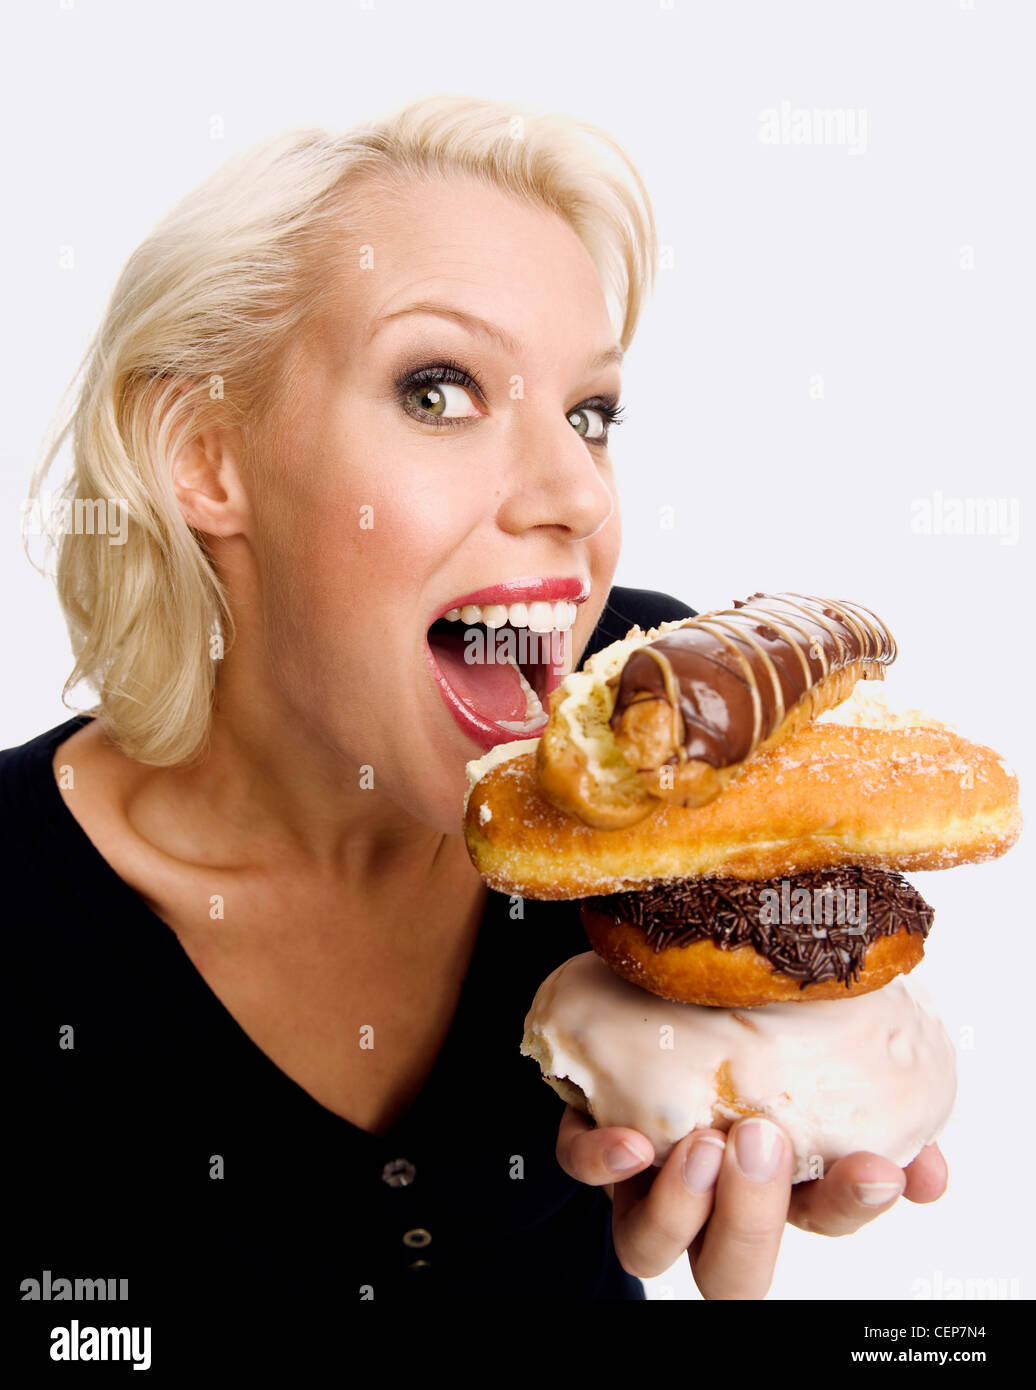 Female holding an iced bun, a chocolate donut, a sugared donut and a chocolate eclair piled up about to take a bite Stock Photo